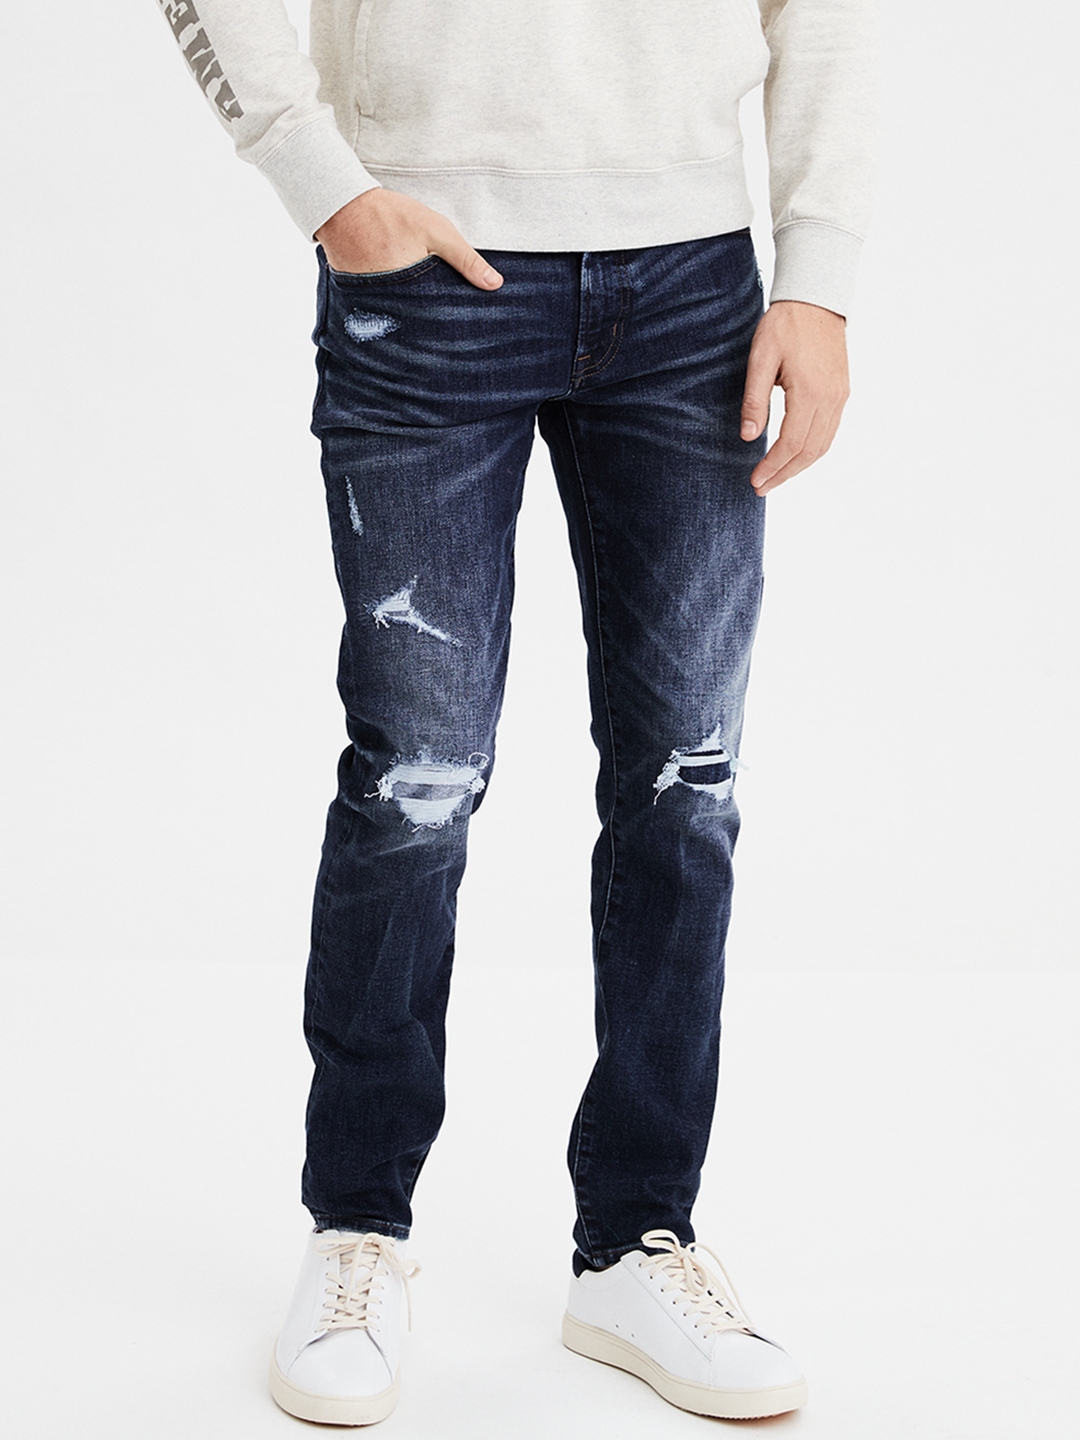 ripped jeans guys american eagle